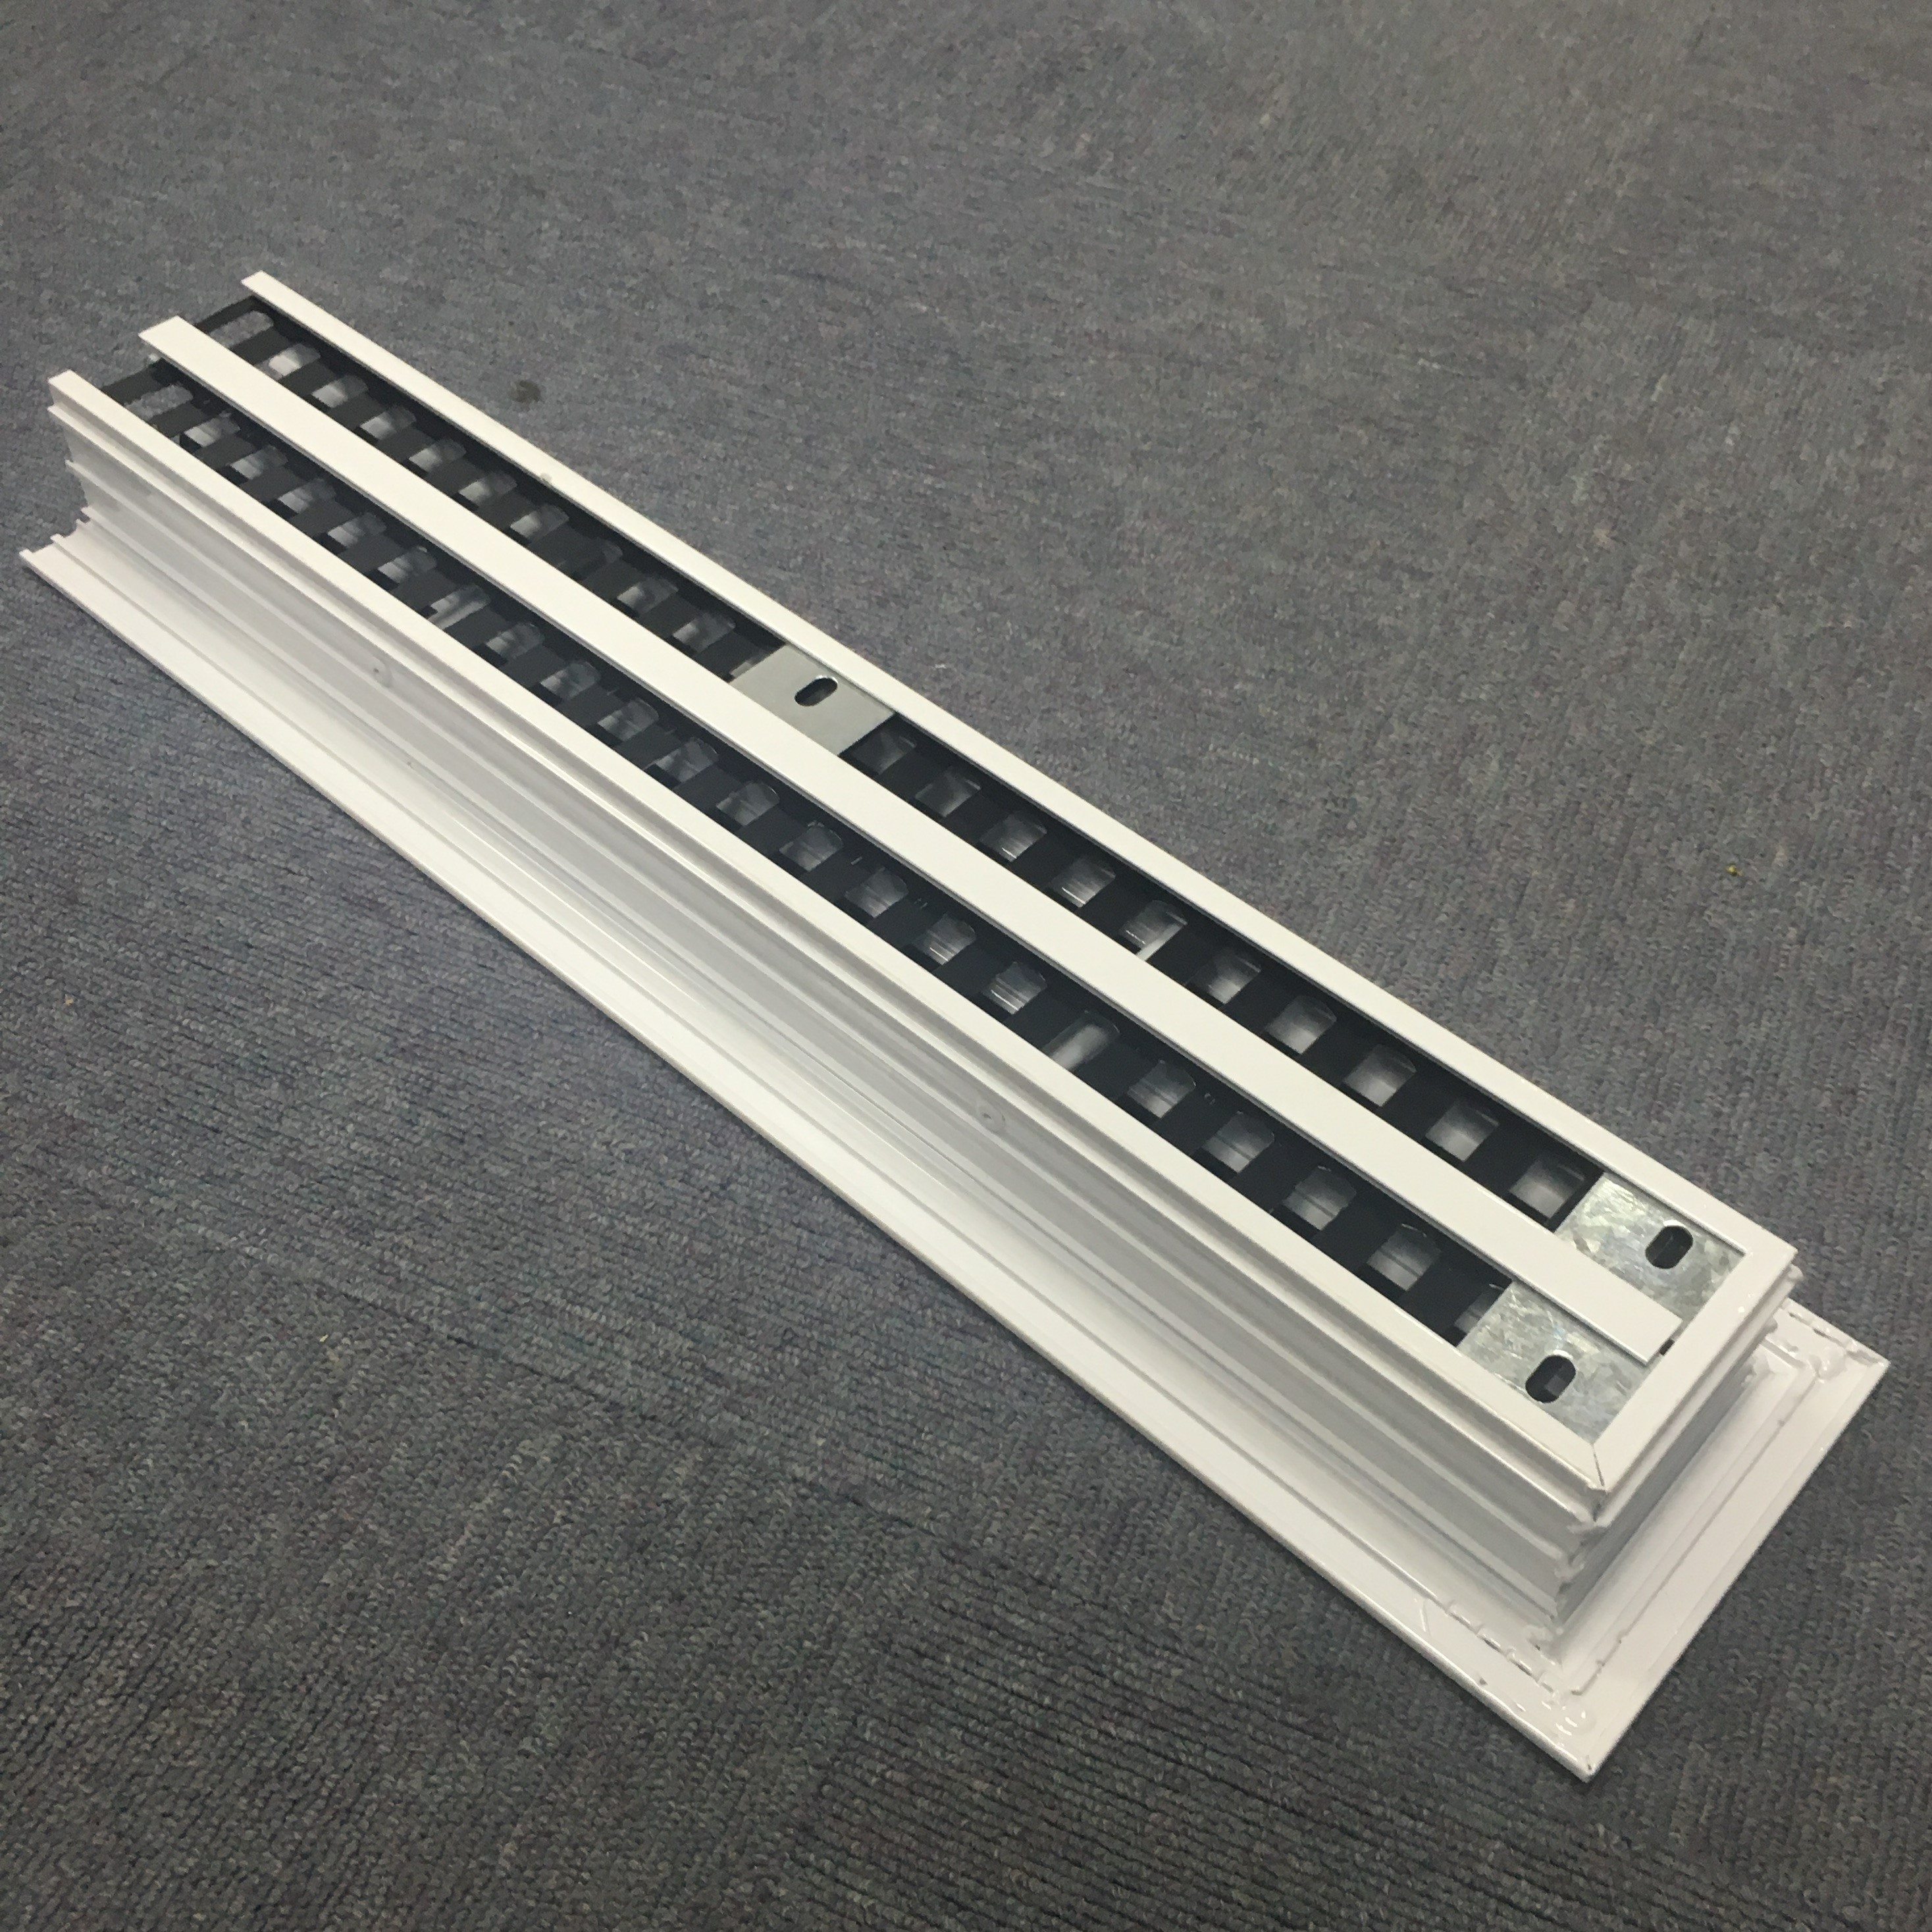 Airmaster  Linear slot diffuser- with removable pattern control device